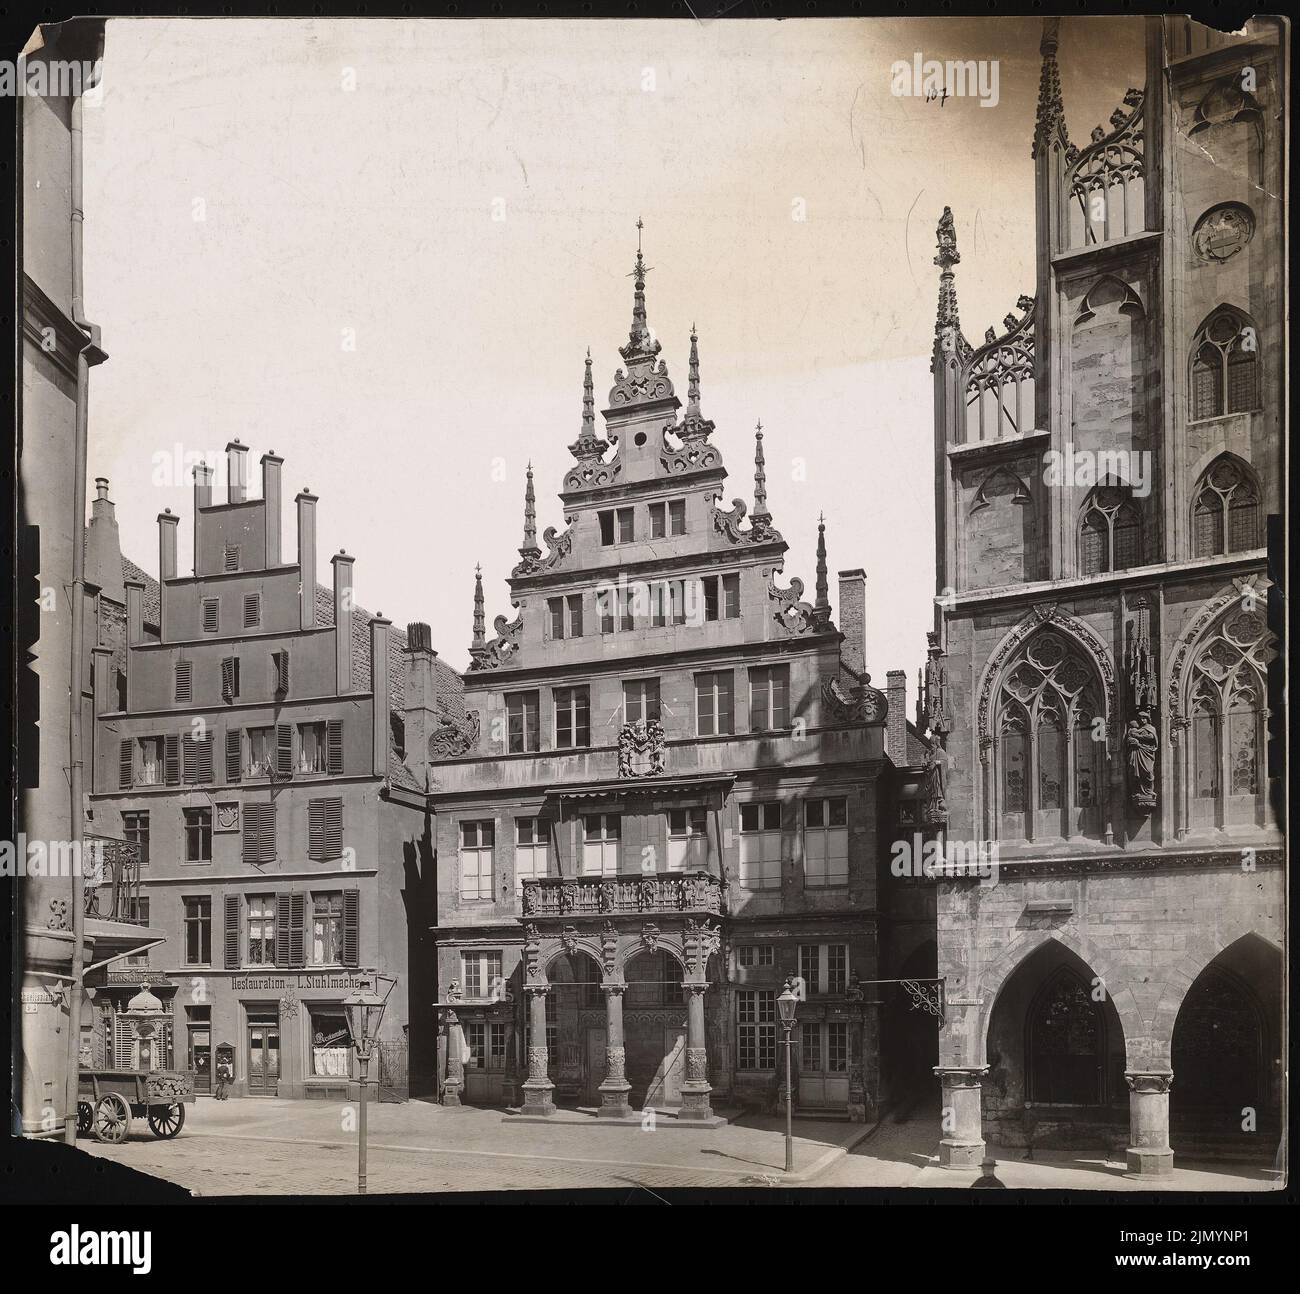 Bocholt Johann von, Stadtweinhaus, Münster (1906): Facade of the Giebelhaus from 1615/16 (late Senaissance) with column portal and rich figurative ornamentation, on the left another gable house and right T. Photo, 37.5 x 40.5 cm (including scan edge ) Stock Photo